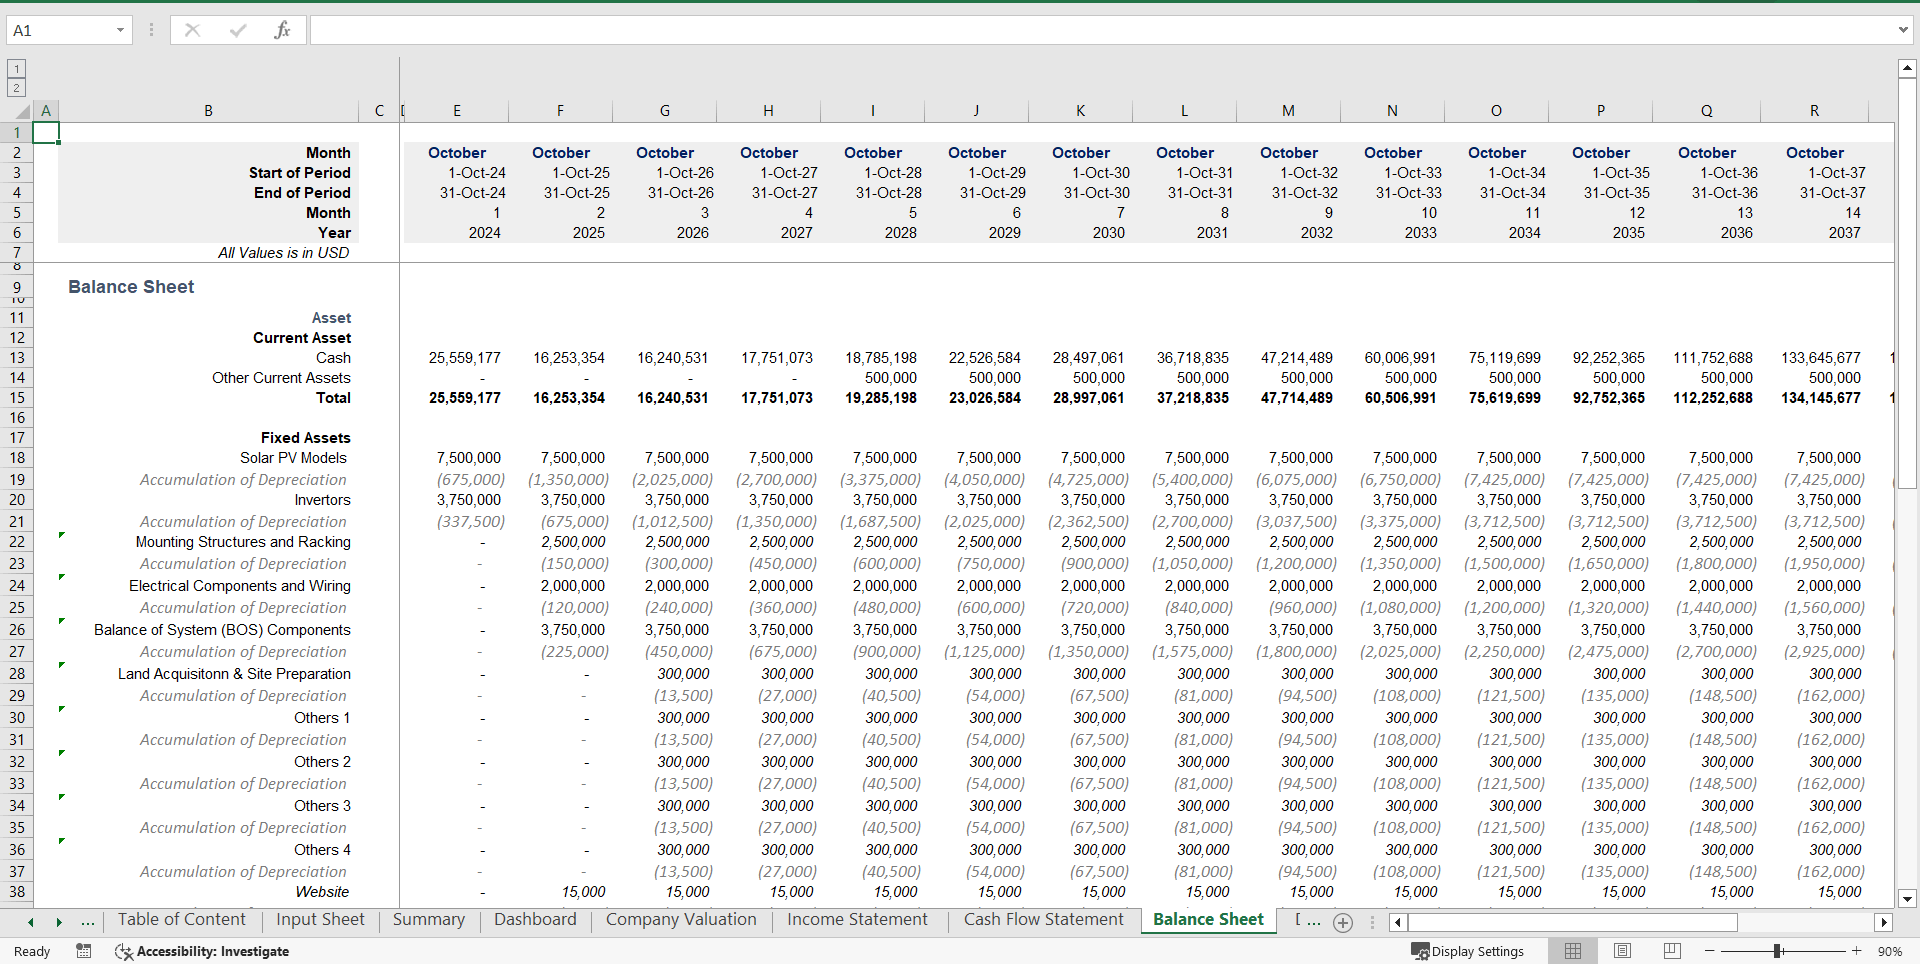 Solar Power Plan Financial Model and Valuation (Excel template (XLSX)) Preview Image